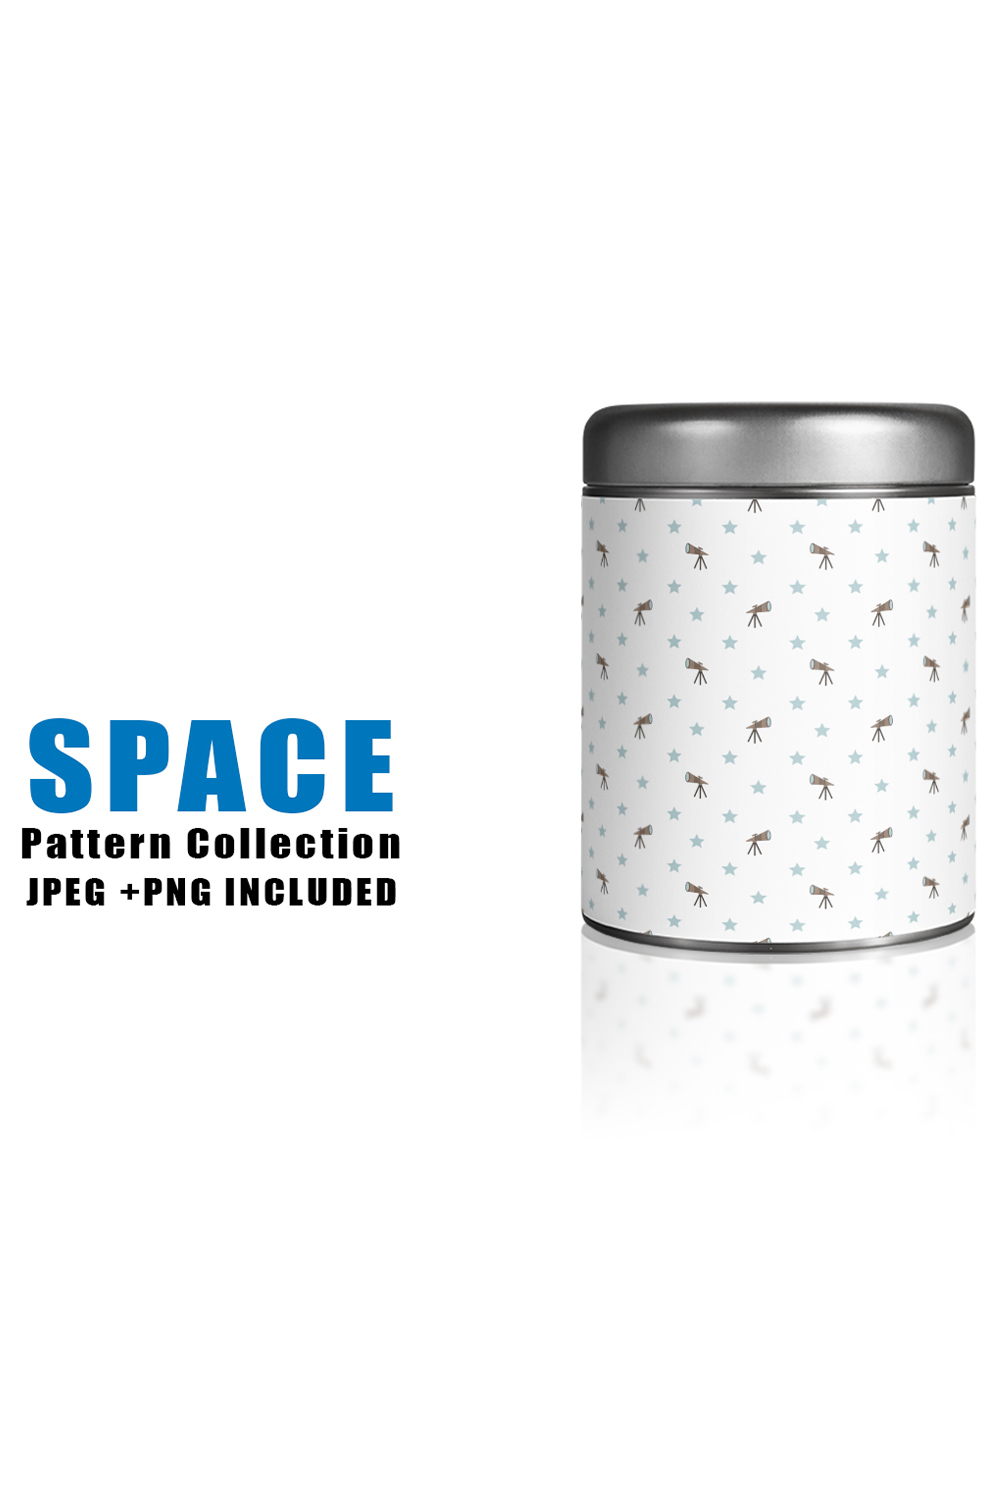 Image of a jar with gorgeous patterns on the theme of space